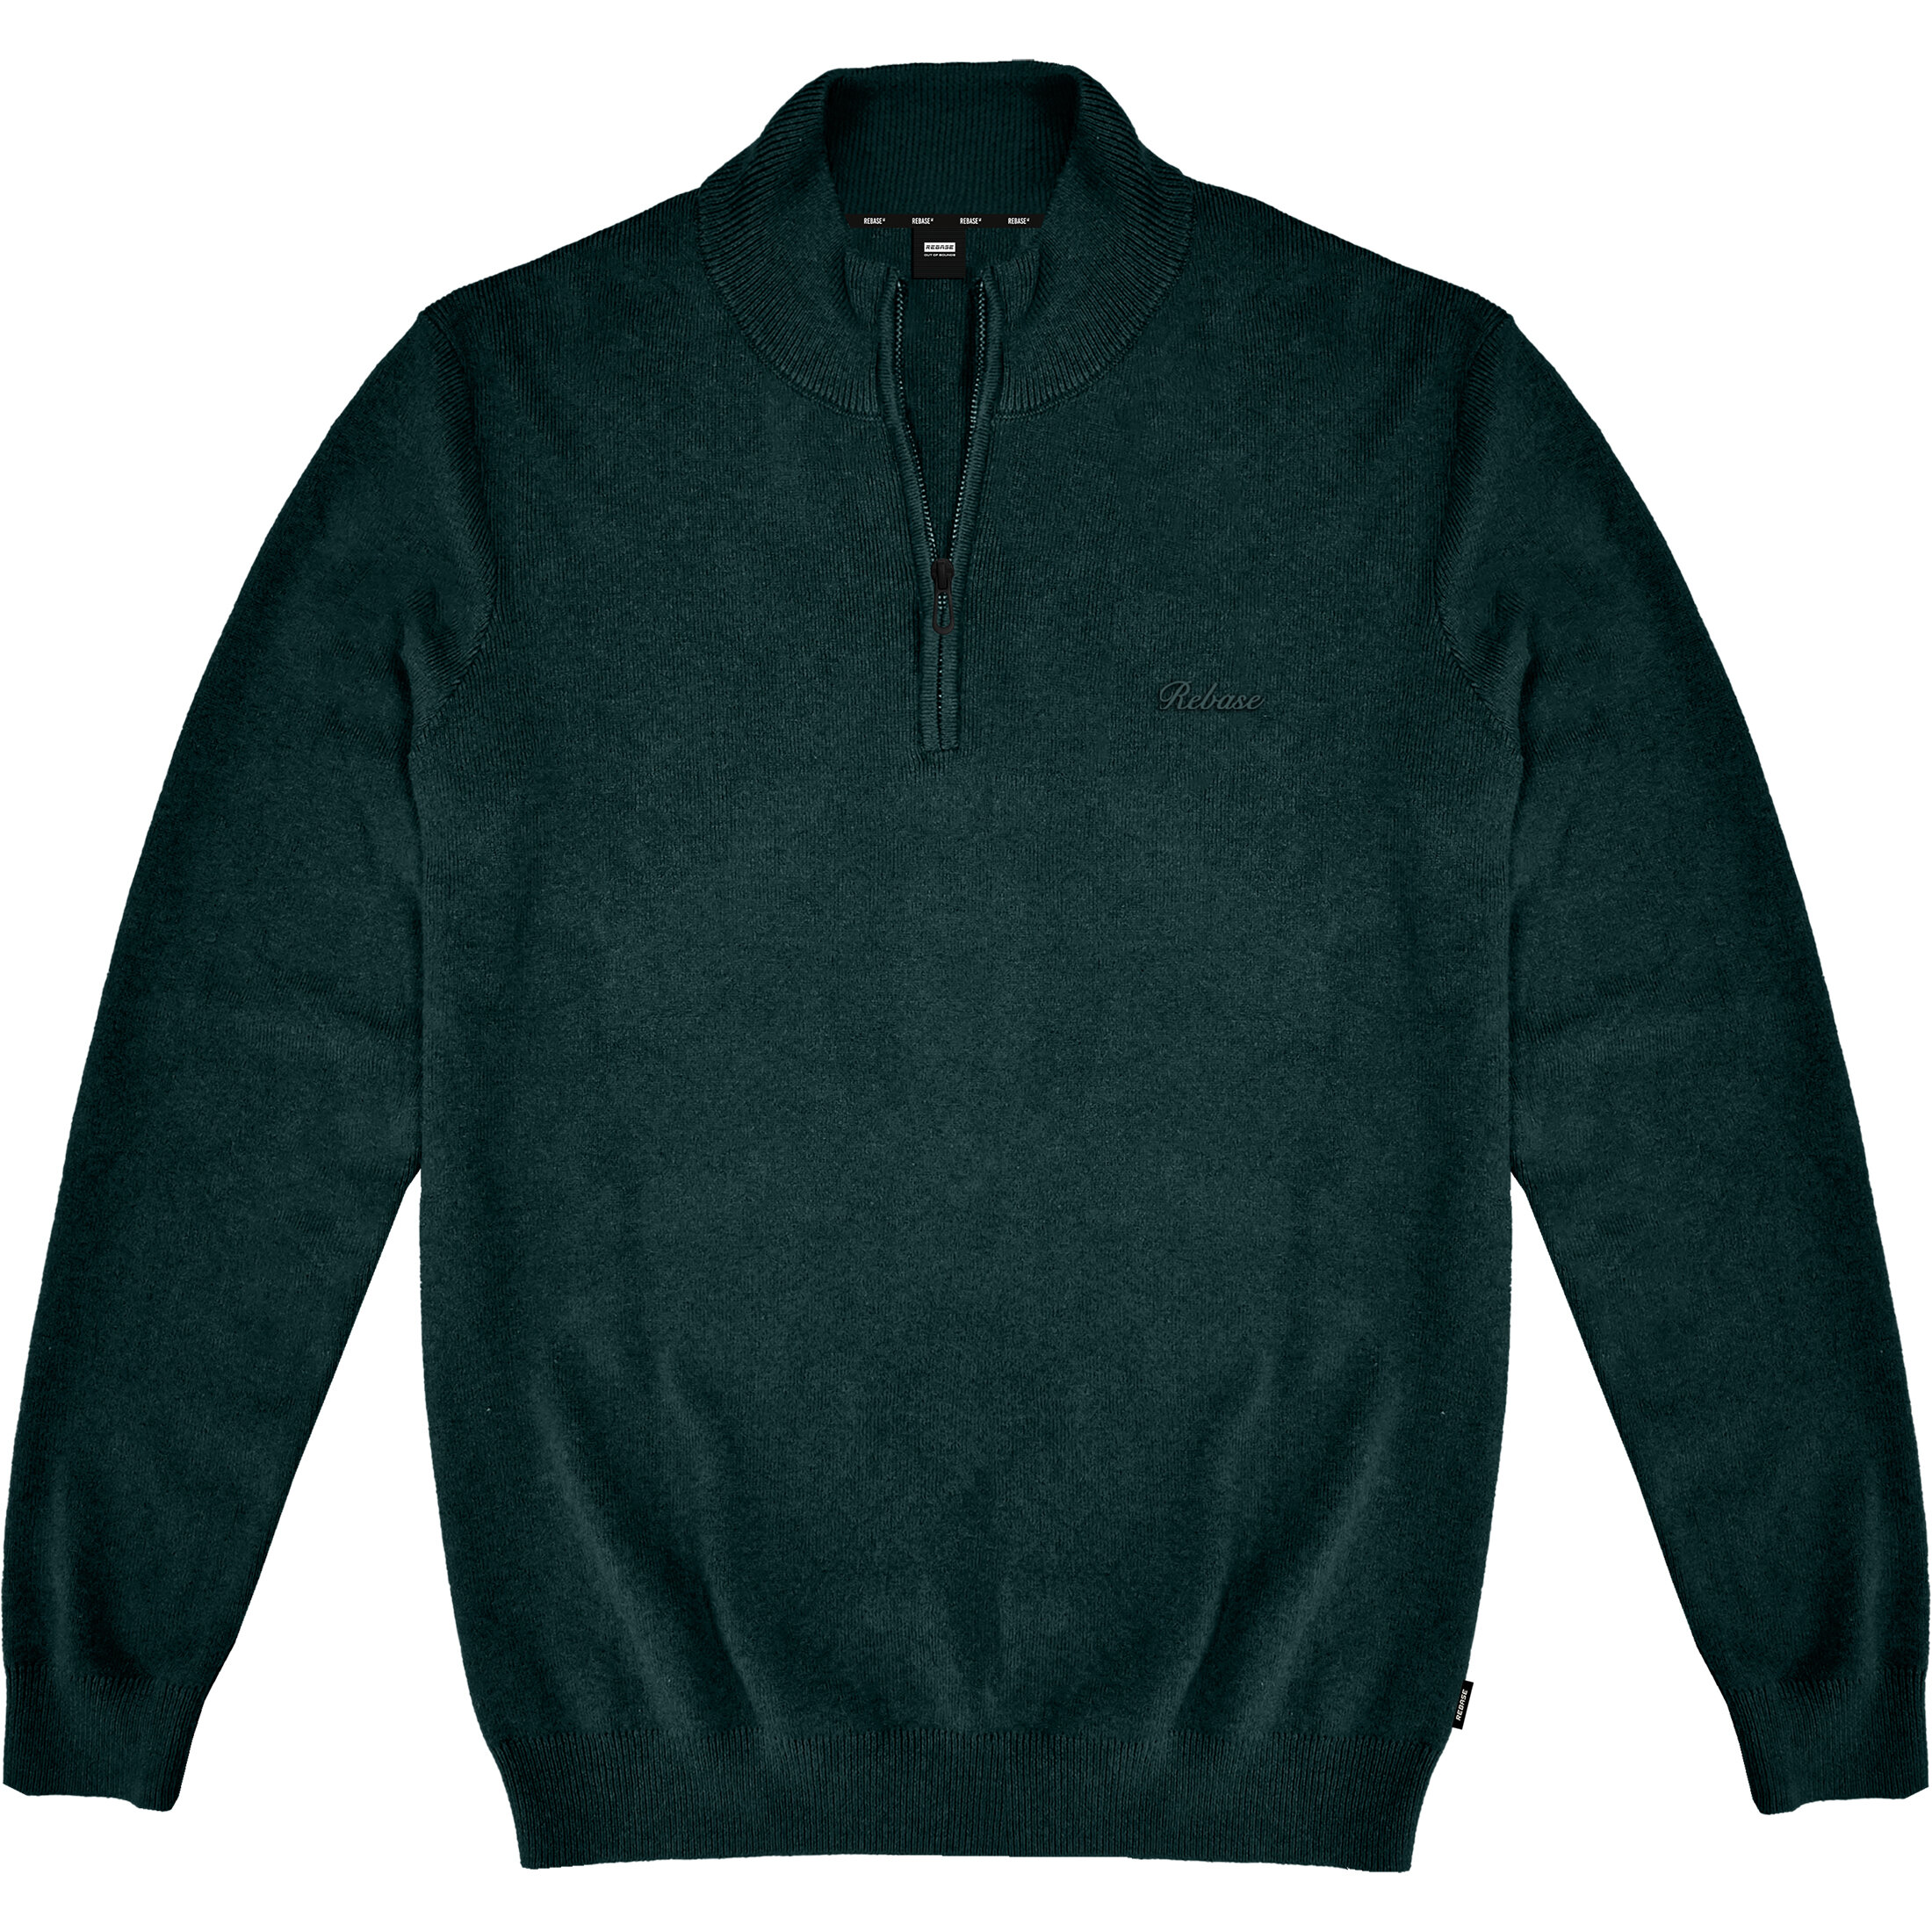 HIGH NECK KNITWEAR WITH 1/4 ZIP